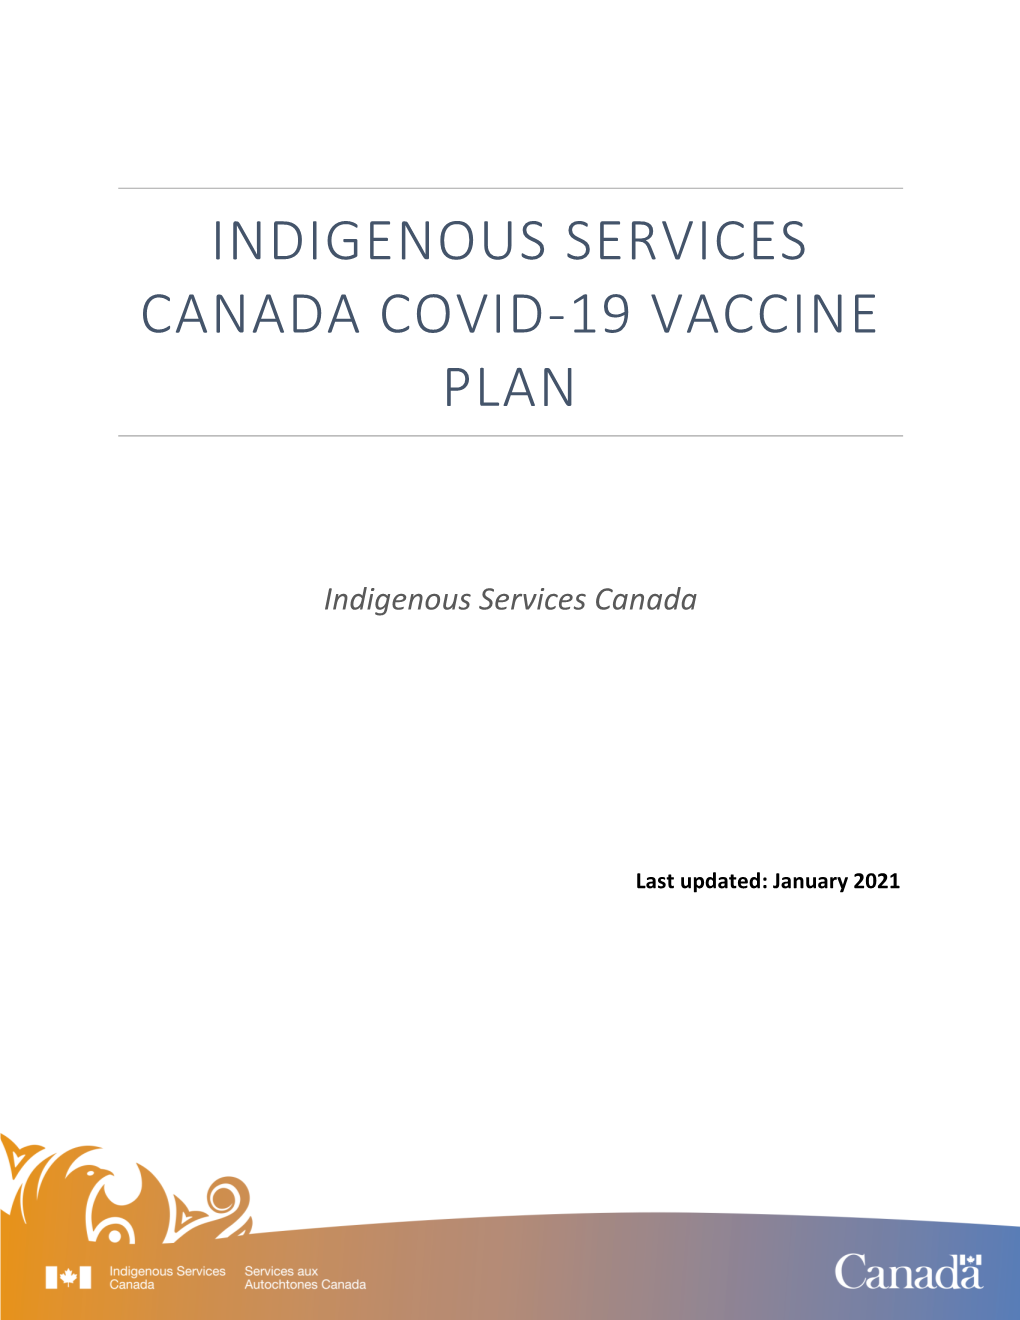 Indigenous Services Canada Covid-19 Vaccine Plan